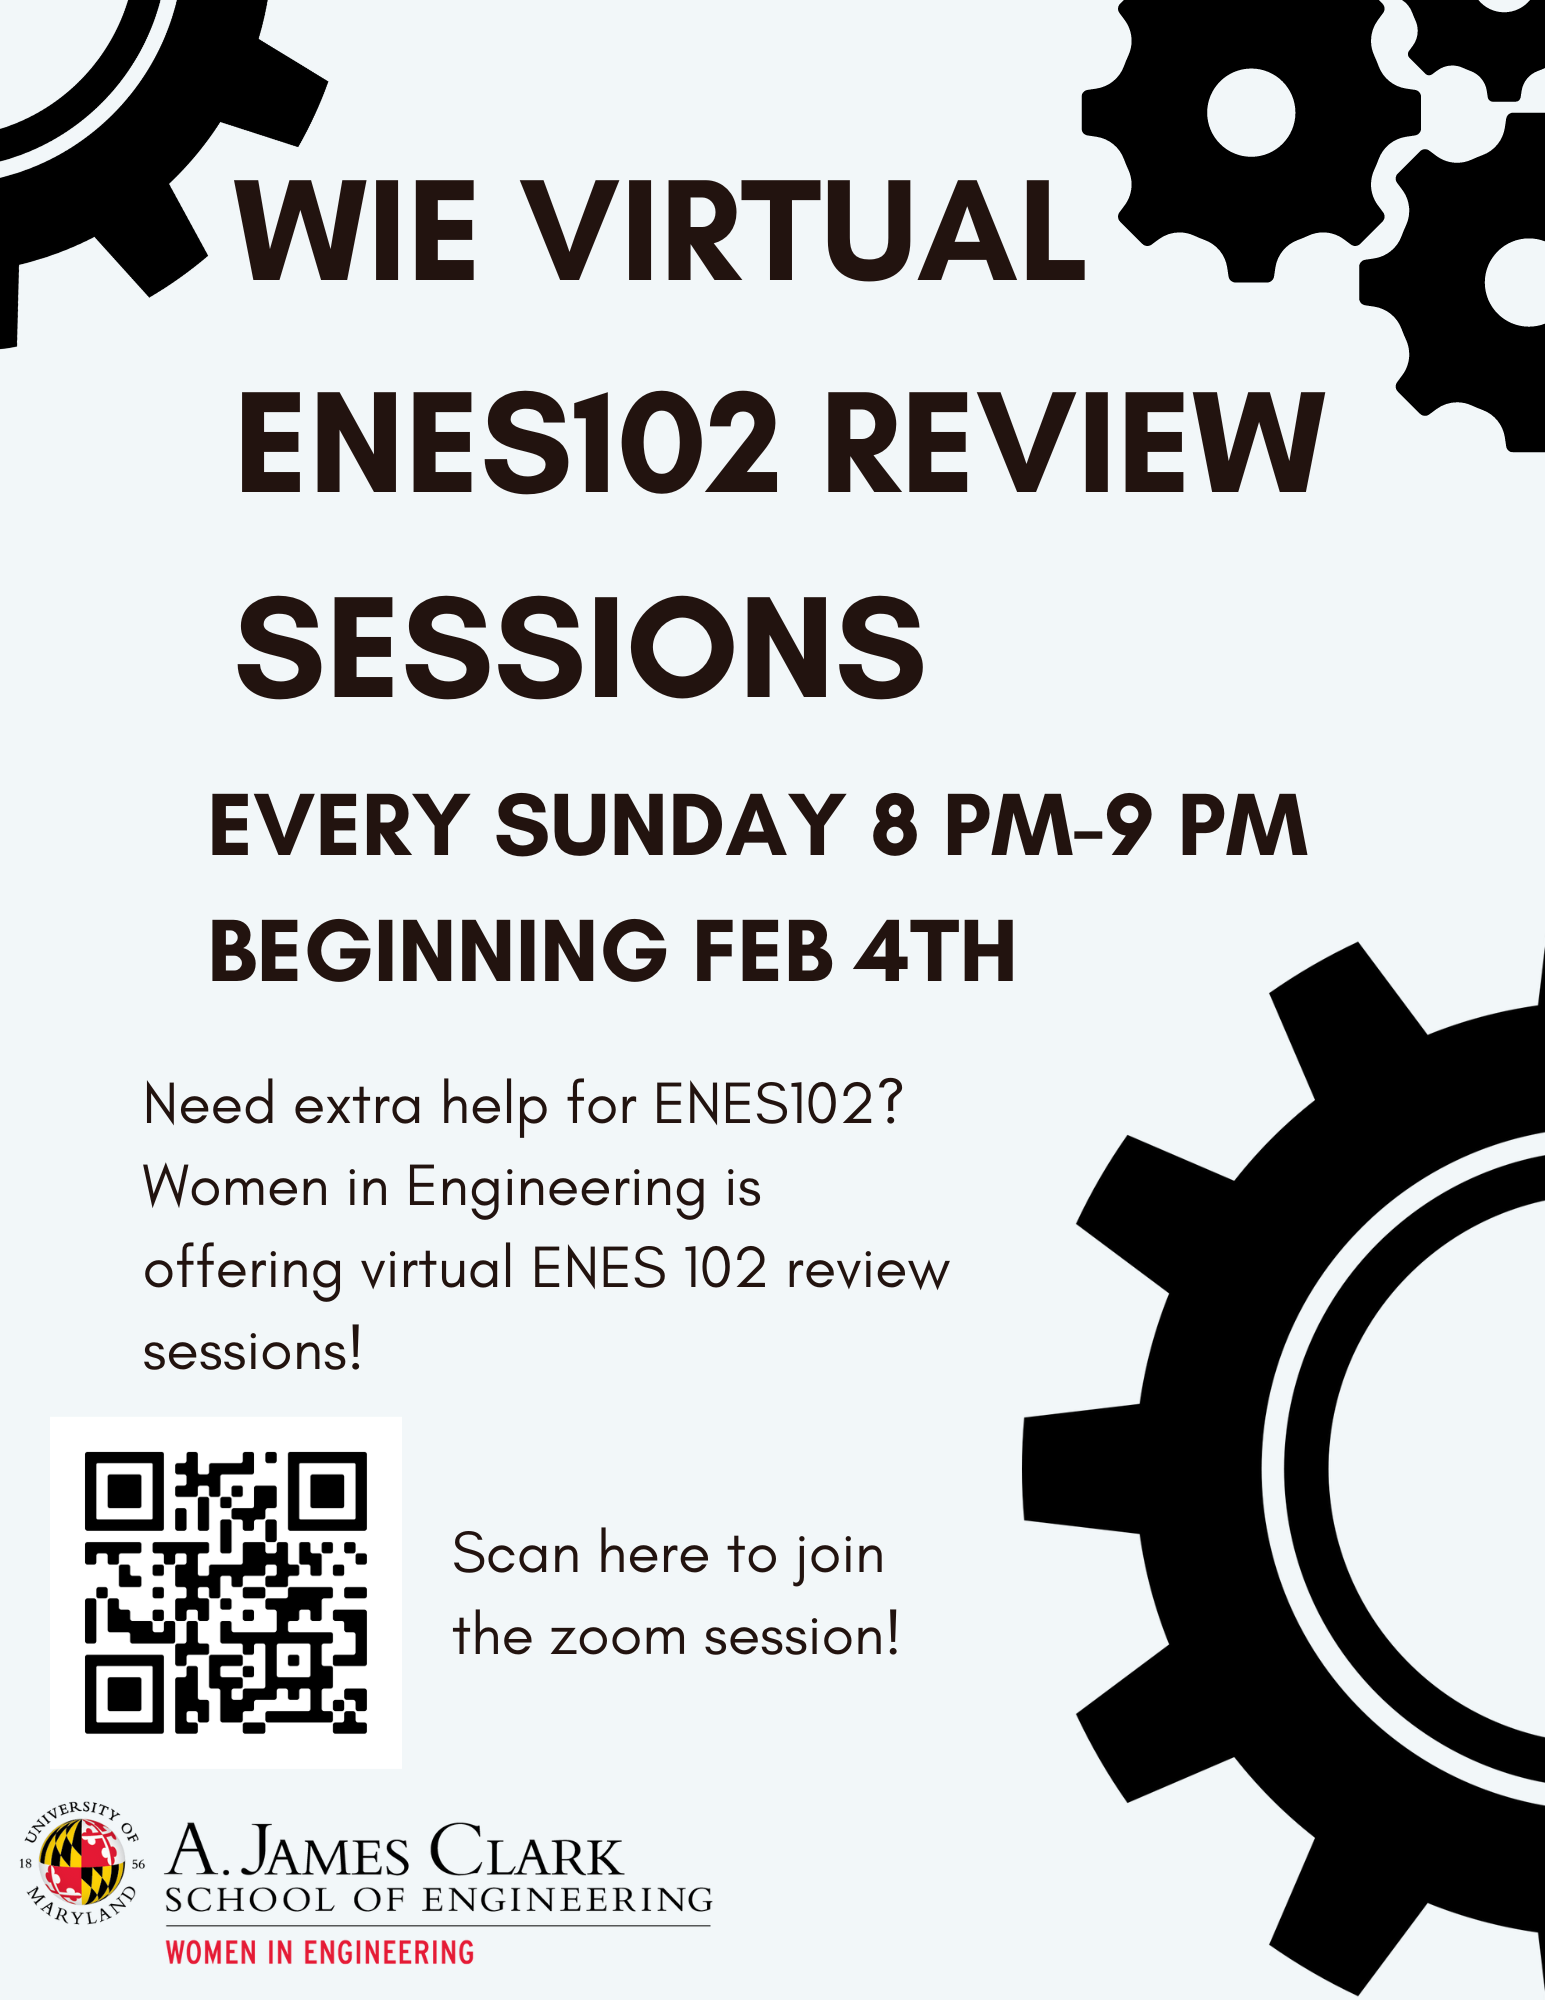 ENES 102 Review Sessions Flyer